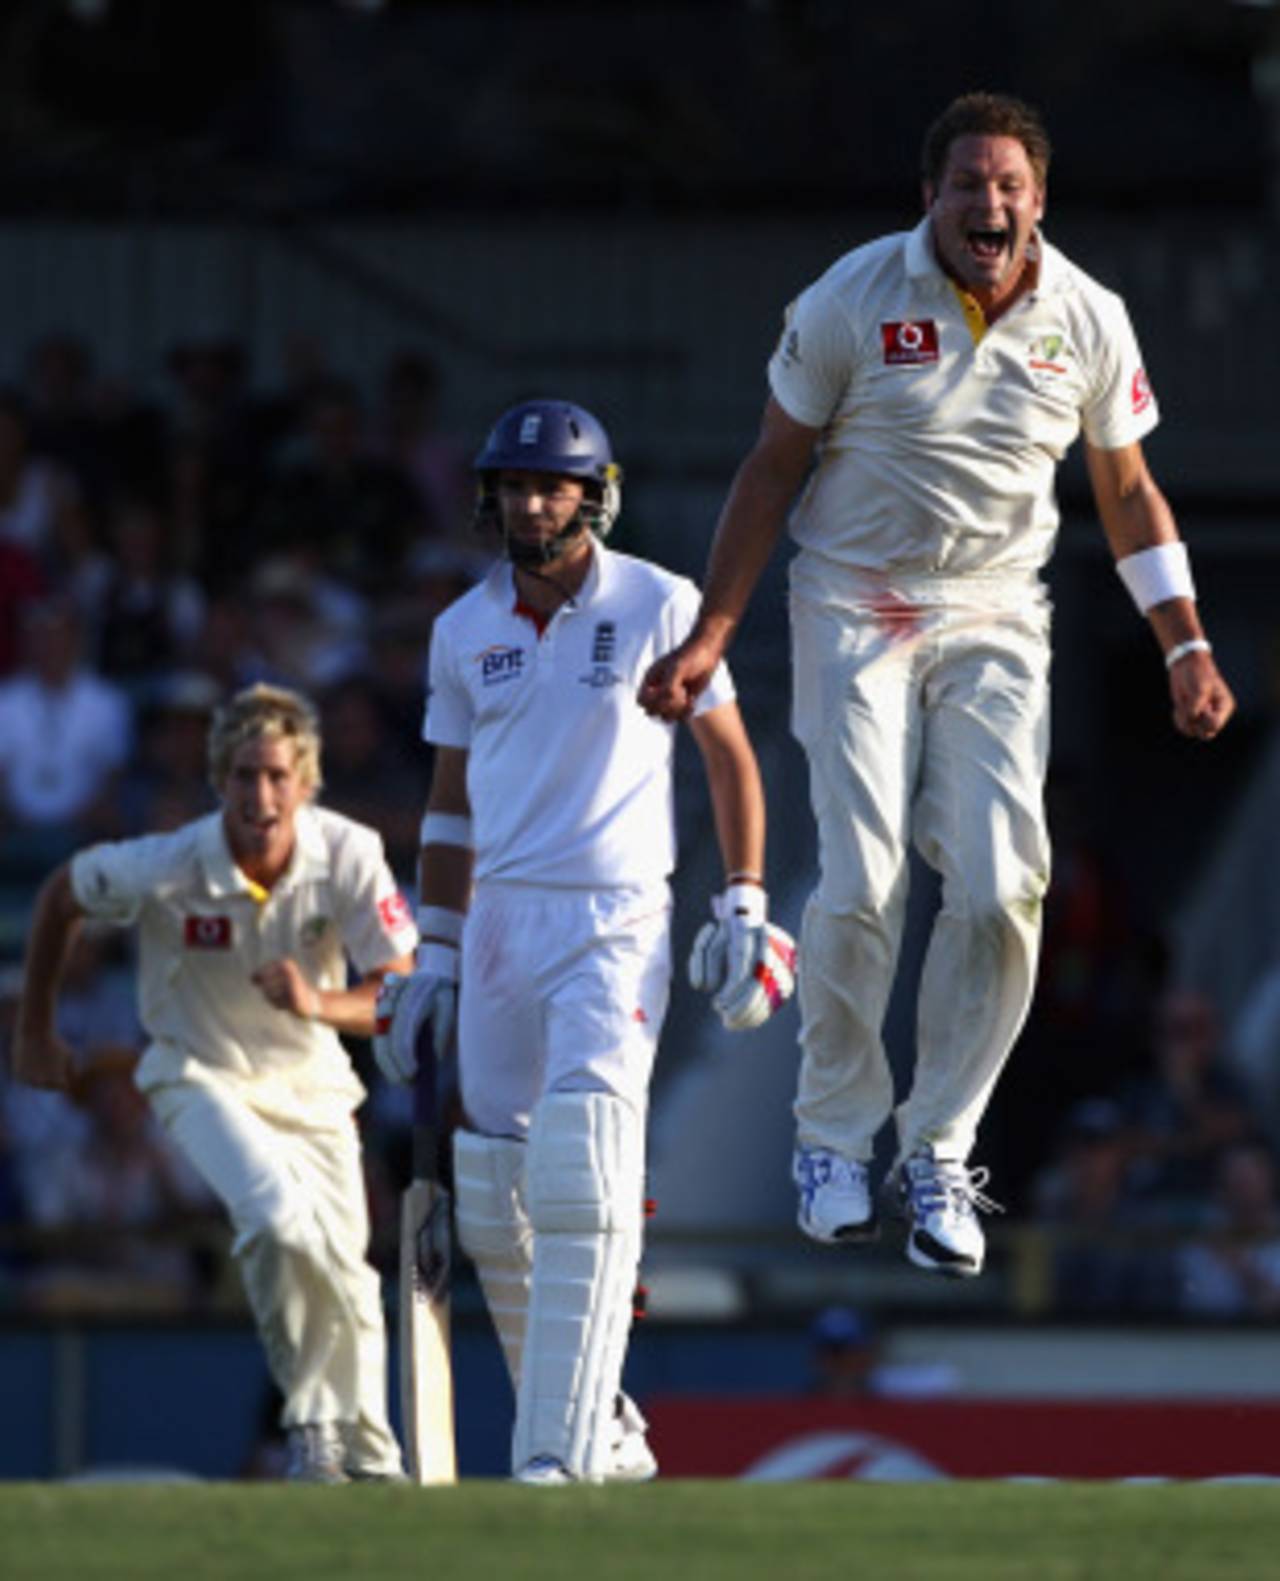 Ryan Harris leaps for joy as James Anderson looks on at Paul Collingwood's dismissal, Australia v England, 3rd Test, Perth, 3rd day, December 18, 2010